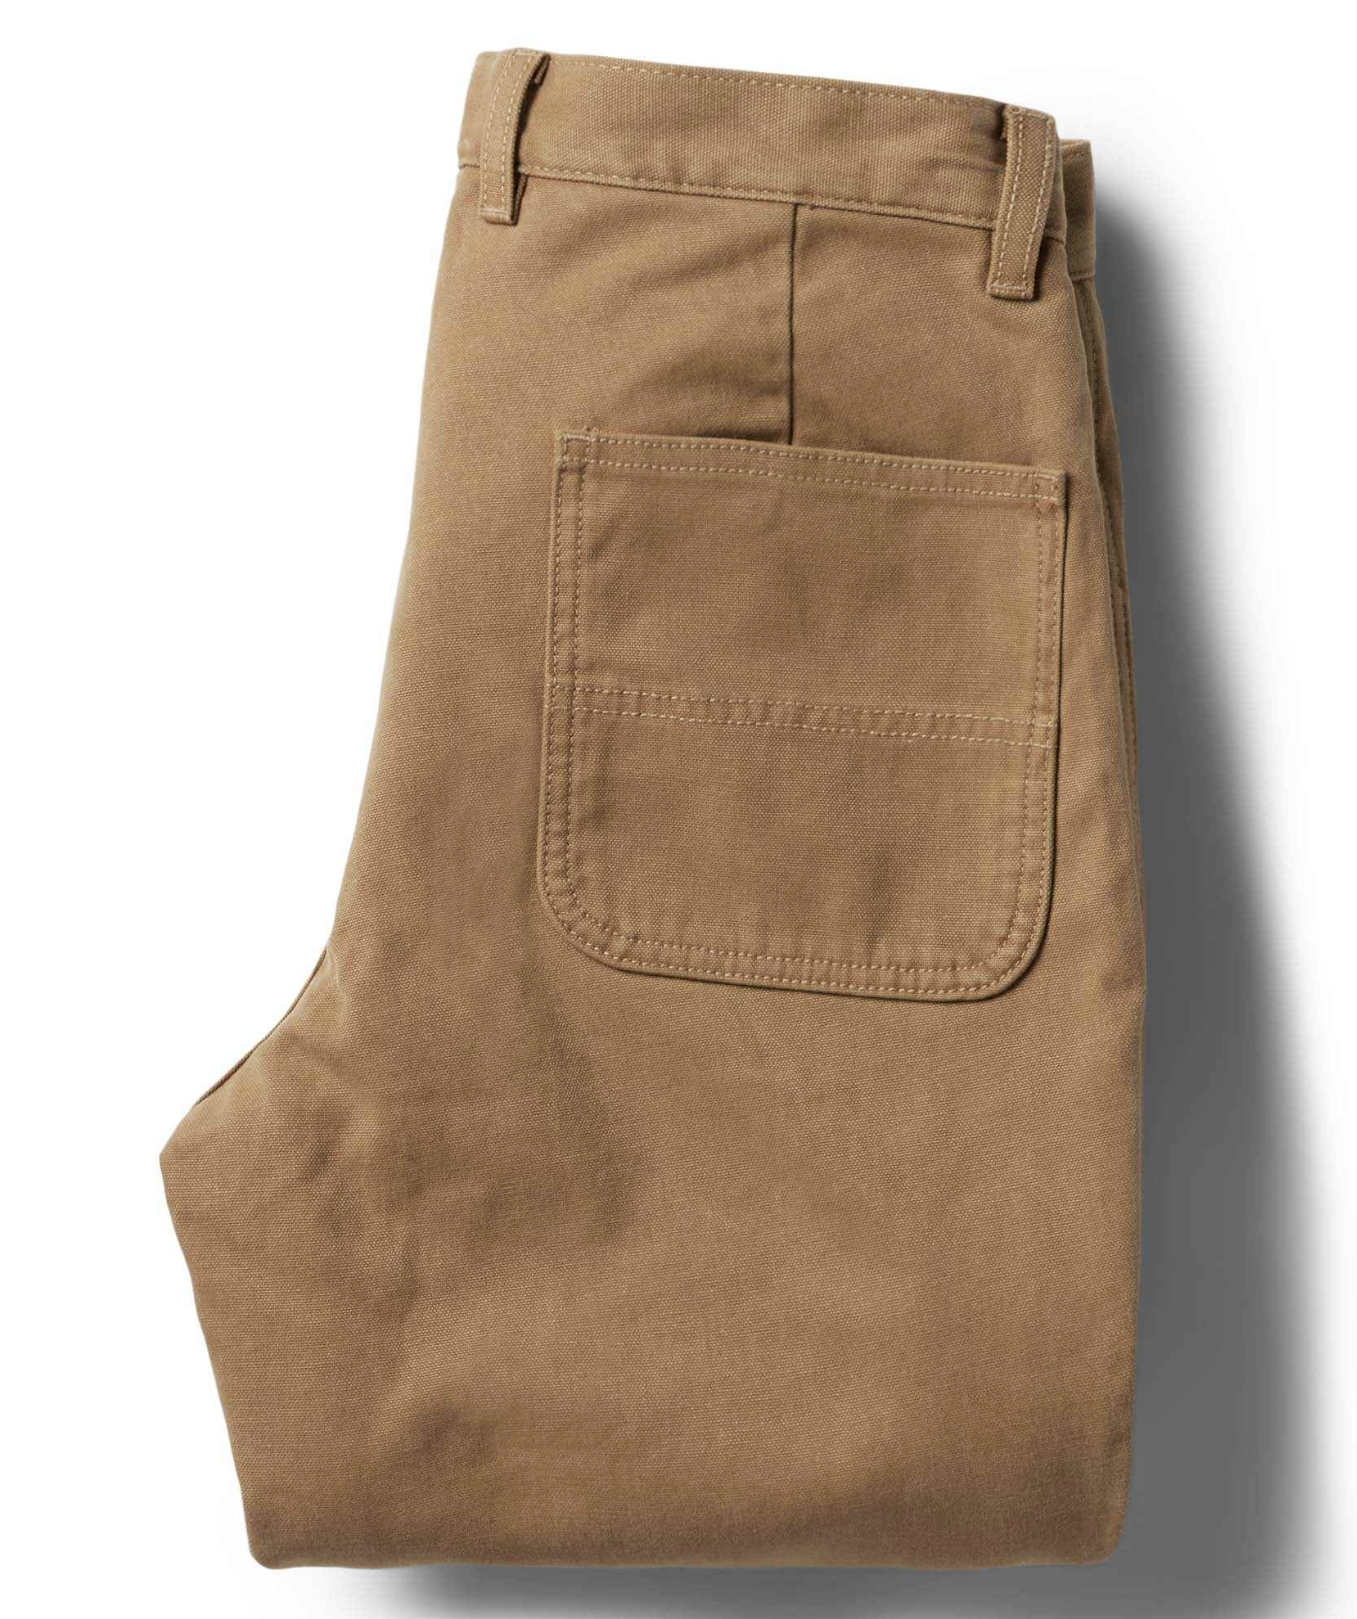 Taylor Stitch Lined Chore Pant in Tobacco Boss Duck